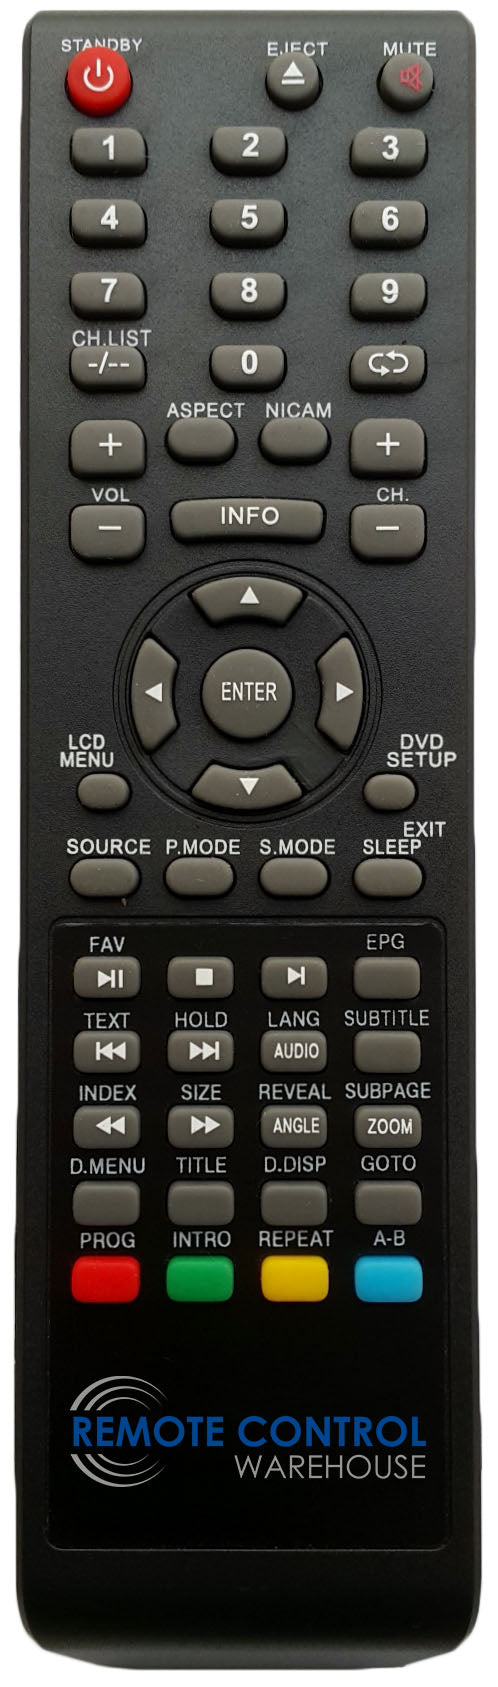 GRUNDIG REPLACEMENT REMOTE CONTROL - GLCD2206HDVR  LCD TV - Remote Control Warehouse